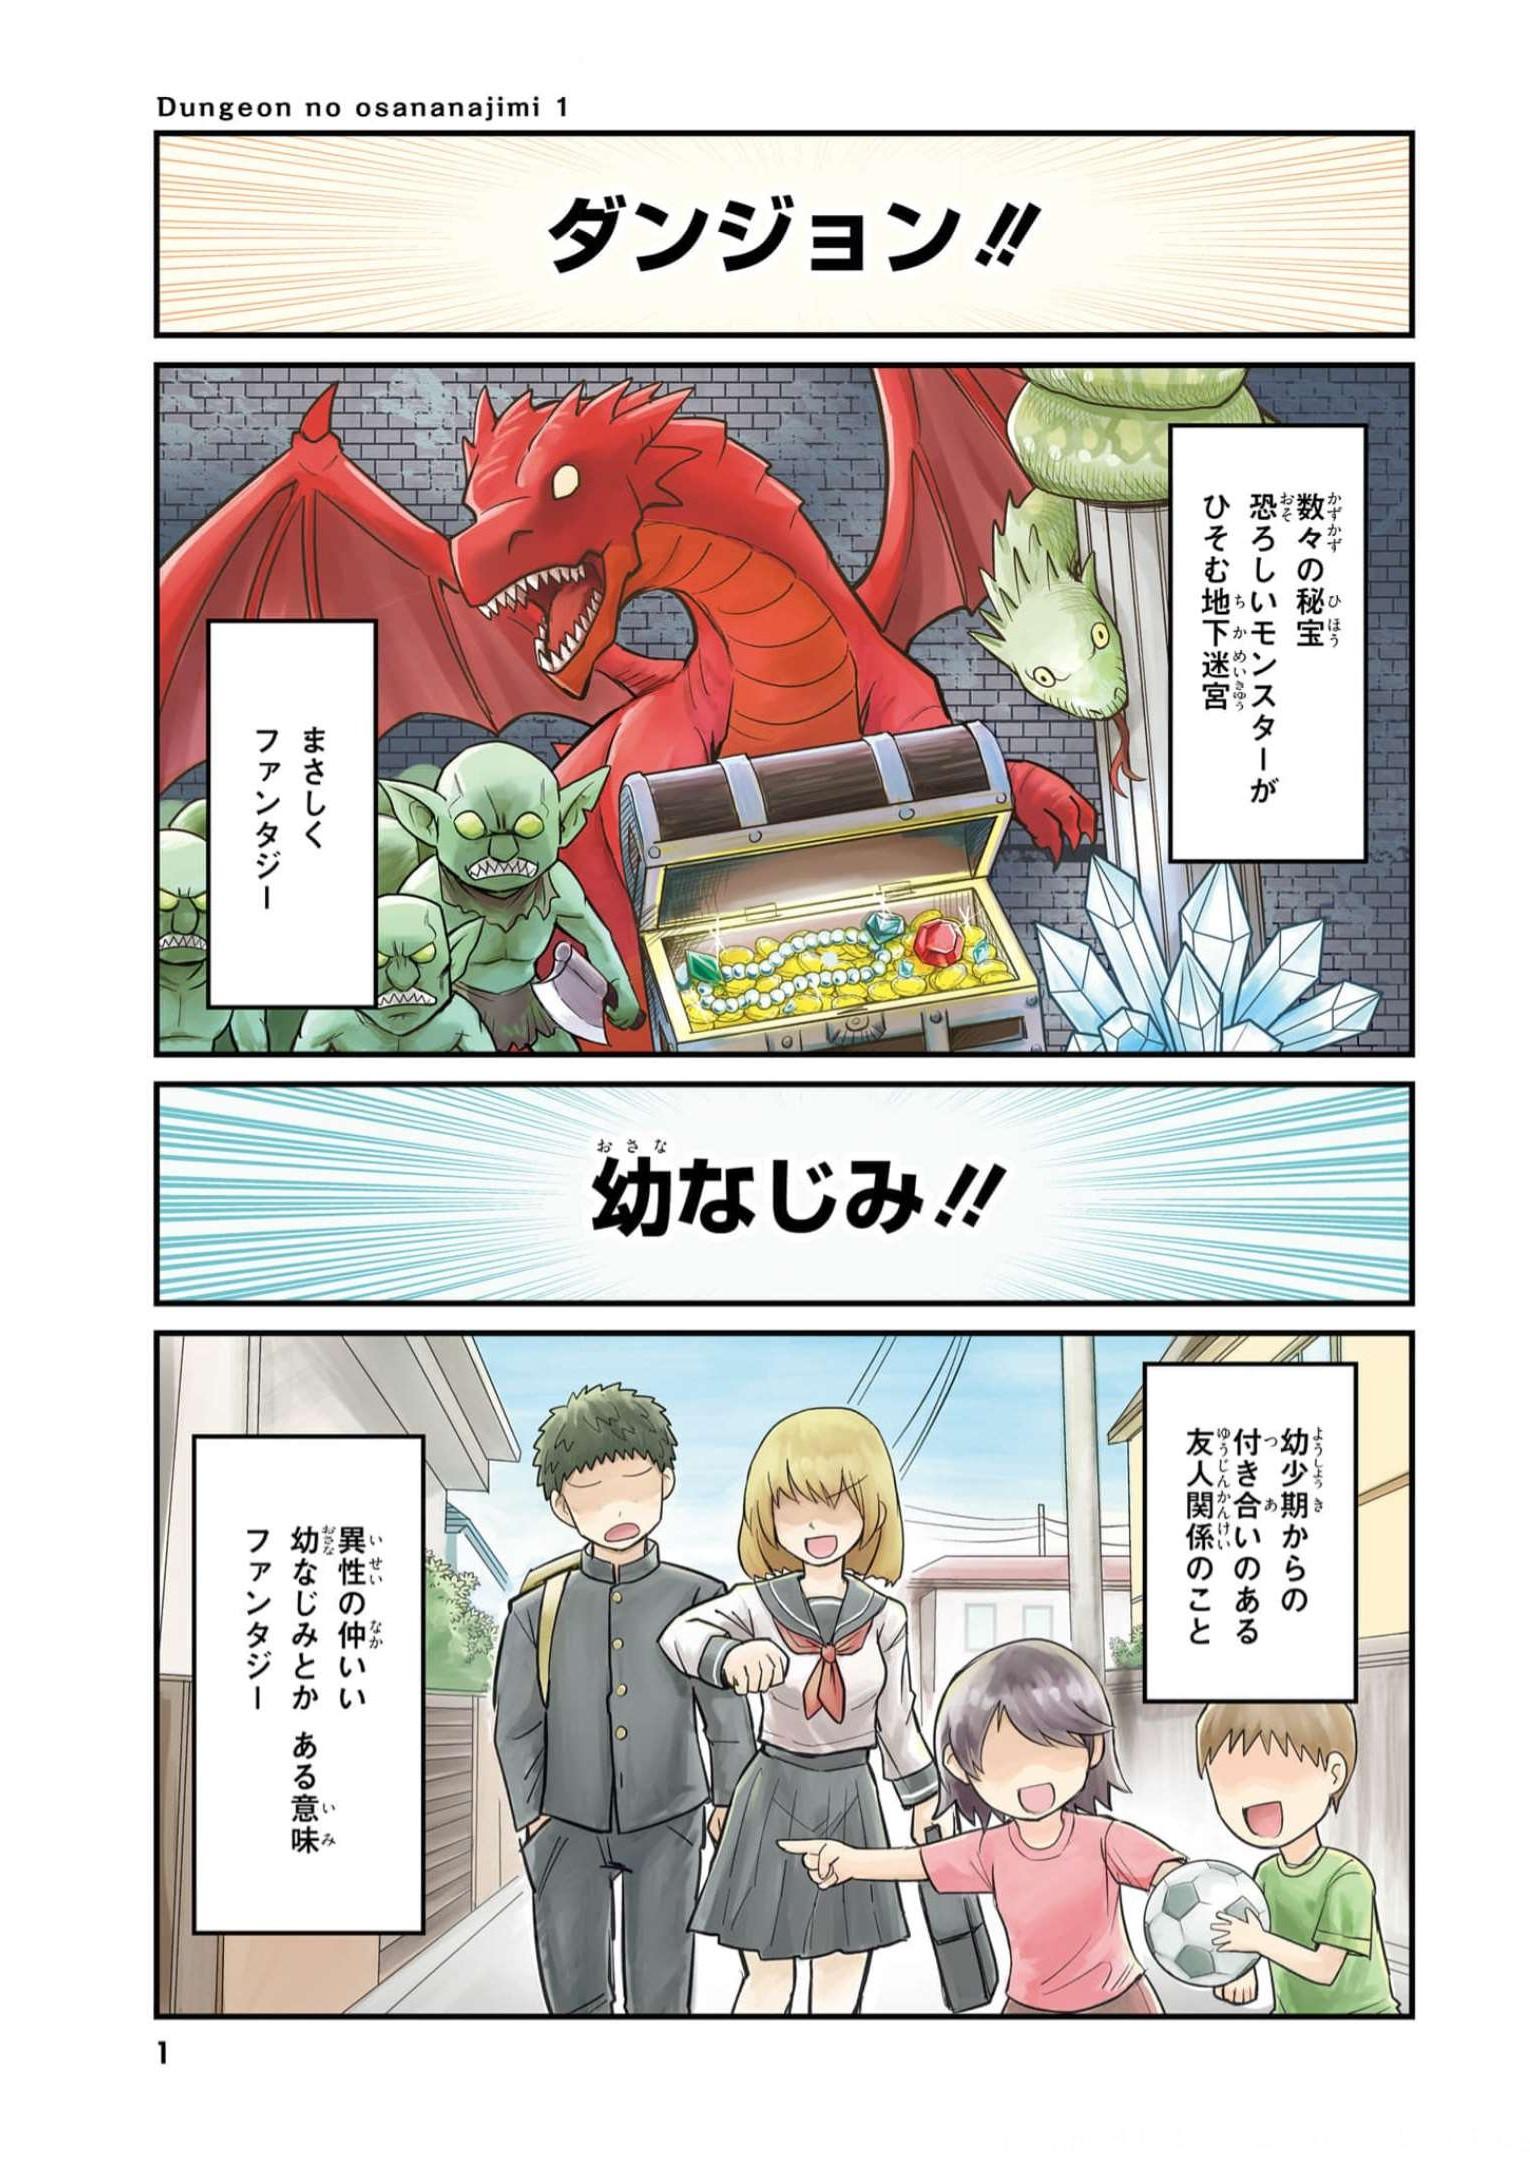 Dungeon Friends Forever Dungeon's Childhood Friend ダンジョンの幼なじみ 第1話 - Page 1